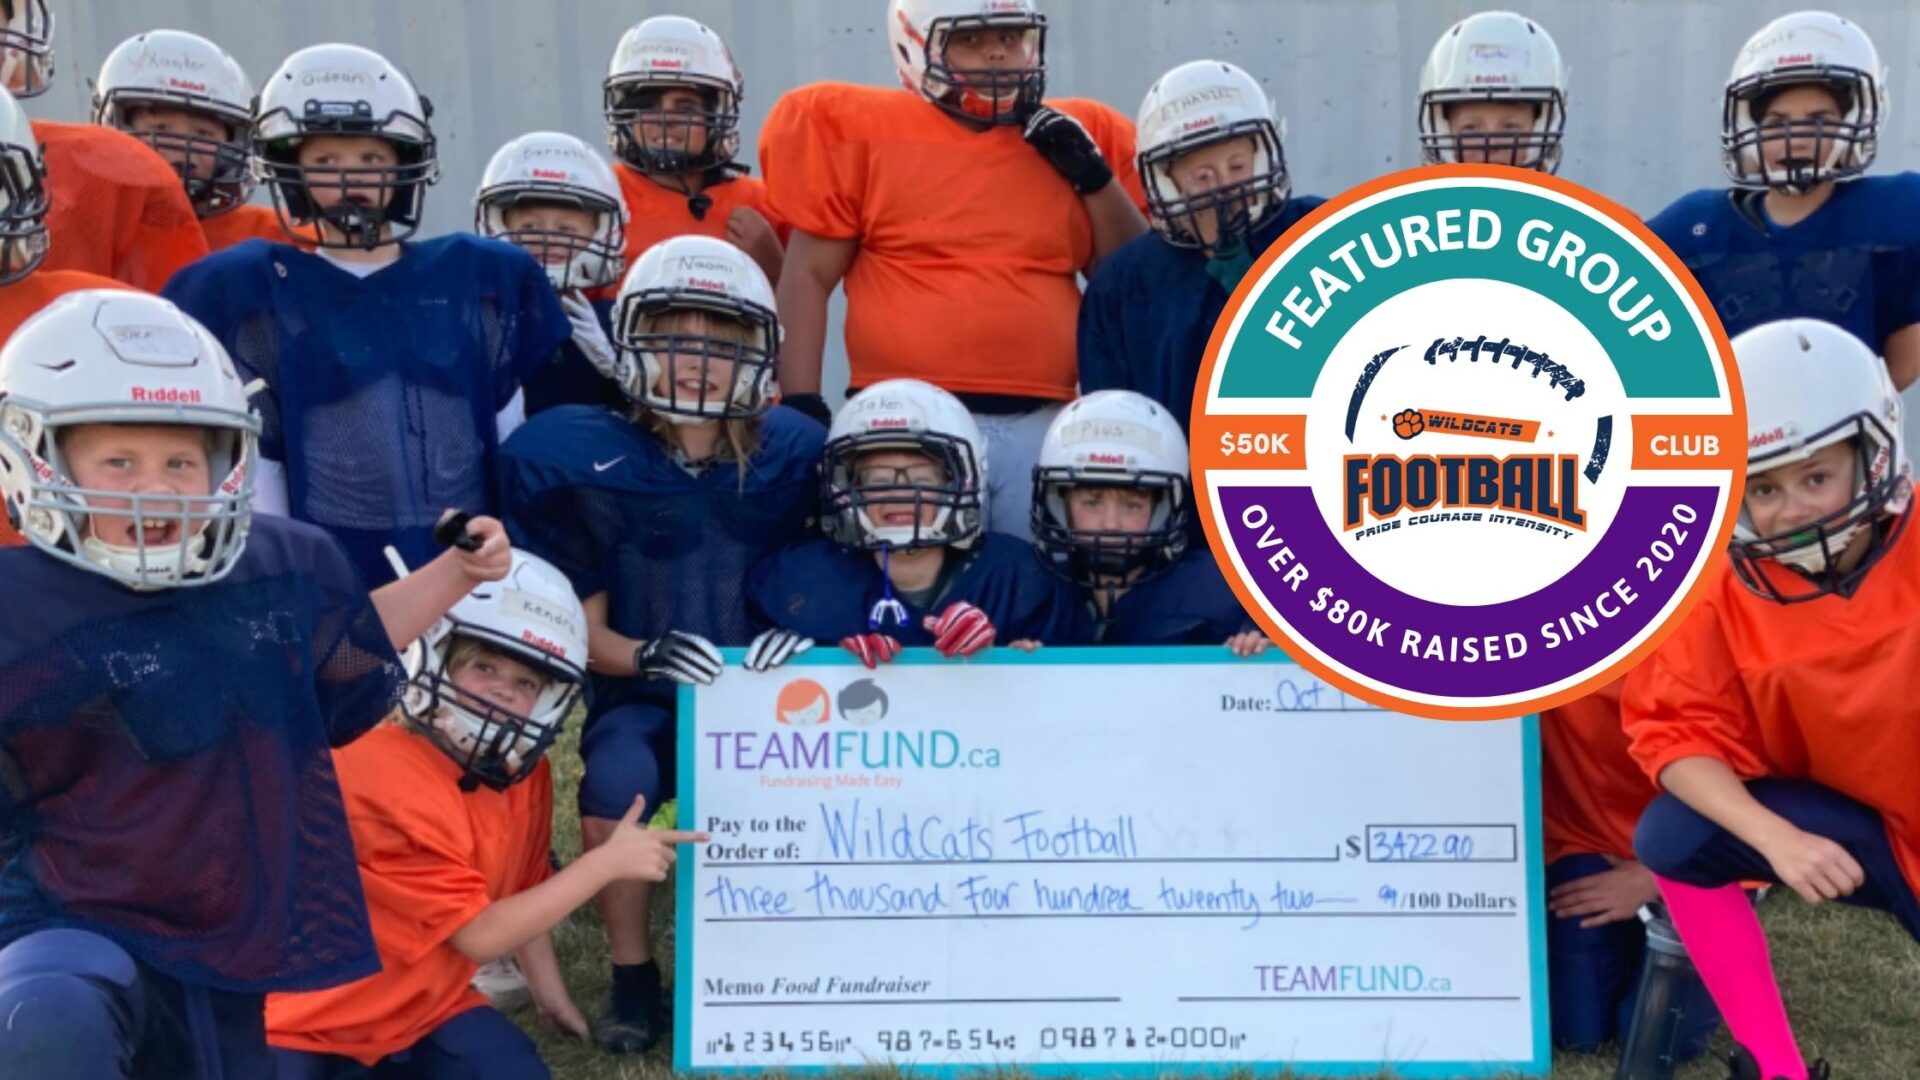 Fundraising Helps The Wildcats Football Team Raise Over $80,000